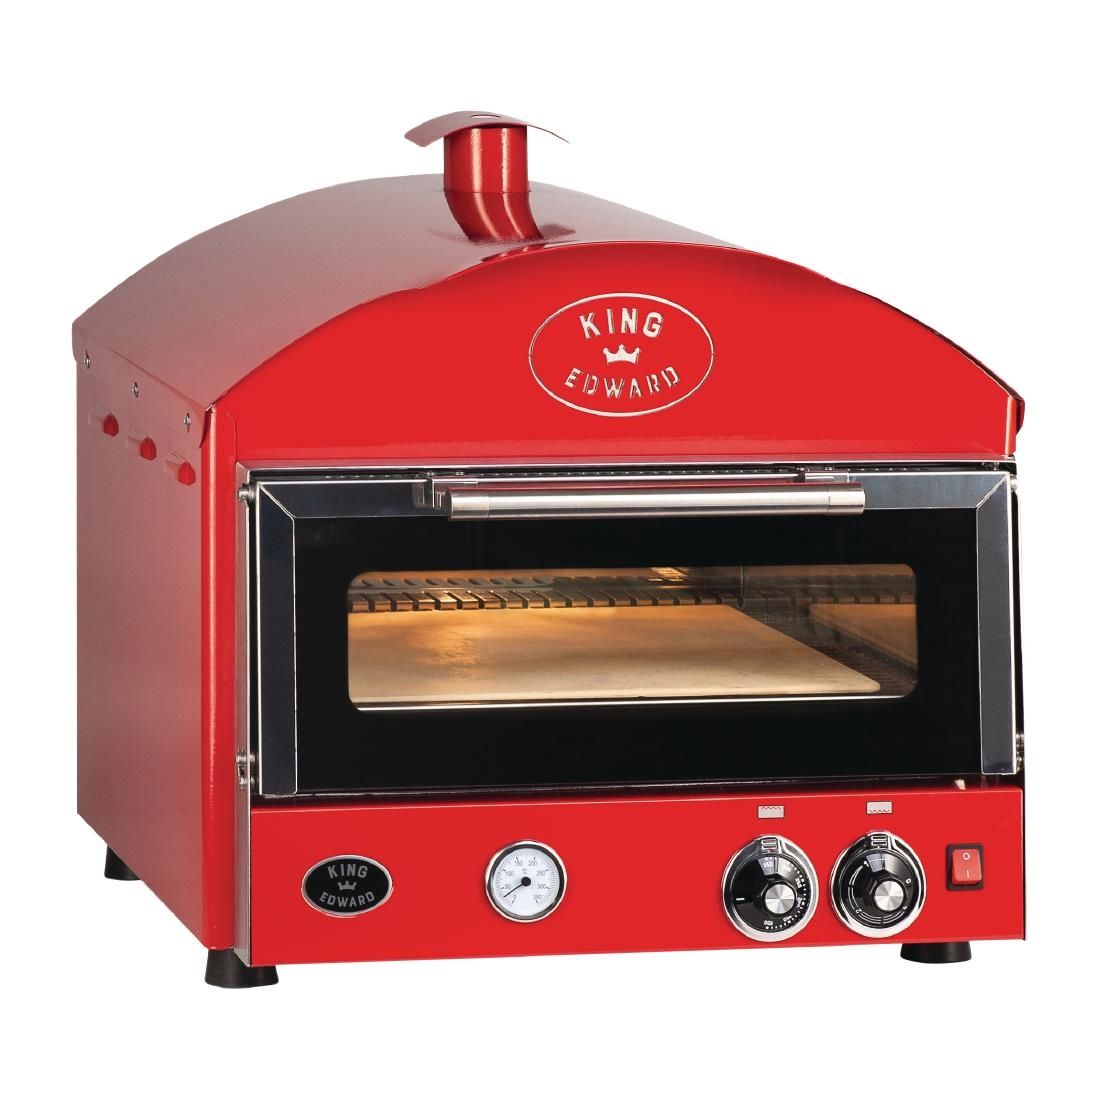 DW474 King Edward Pizza King Oven PK1/RED JD Catering Equipment Solutions Ltd